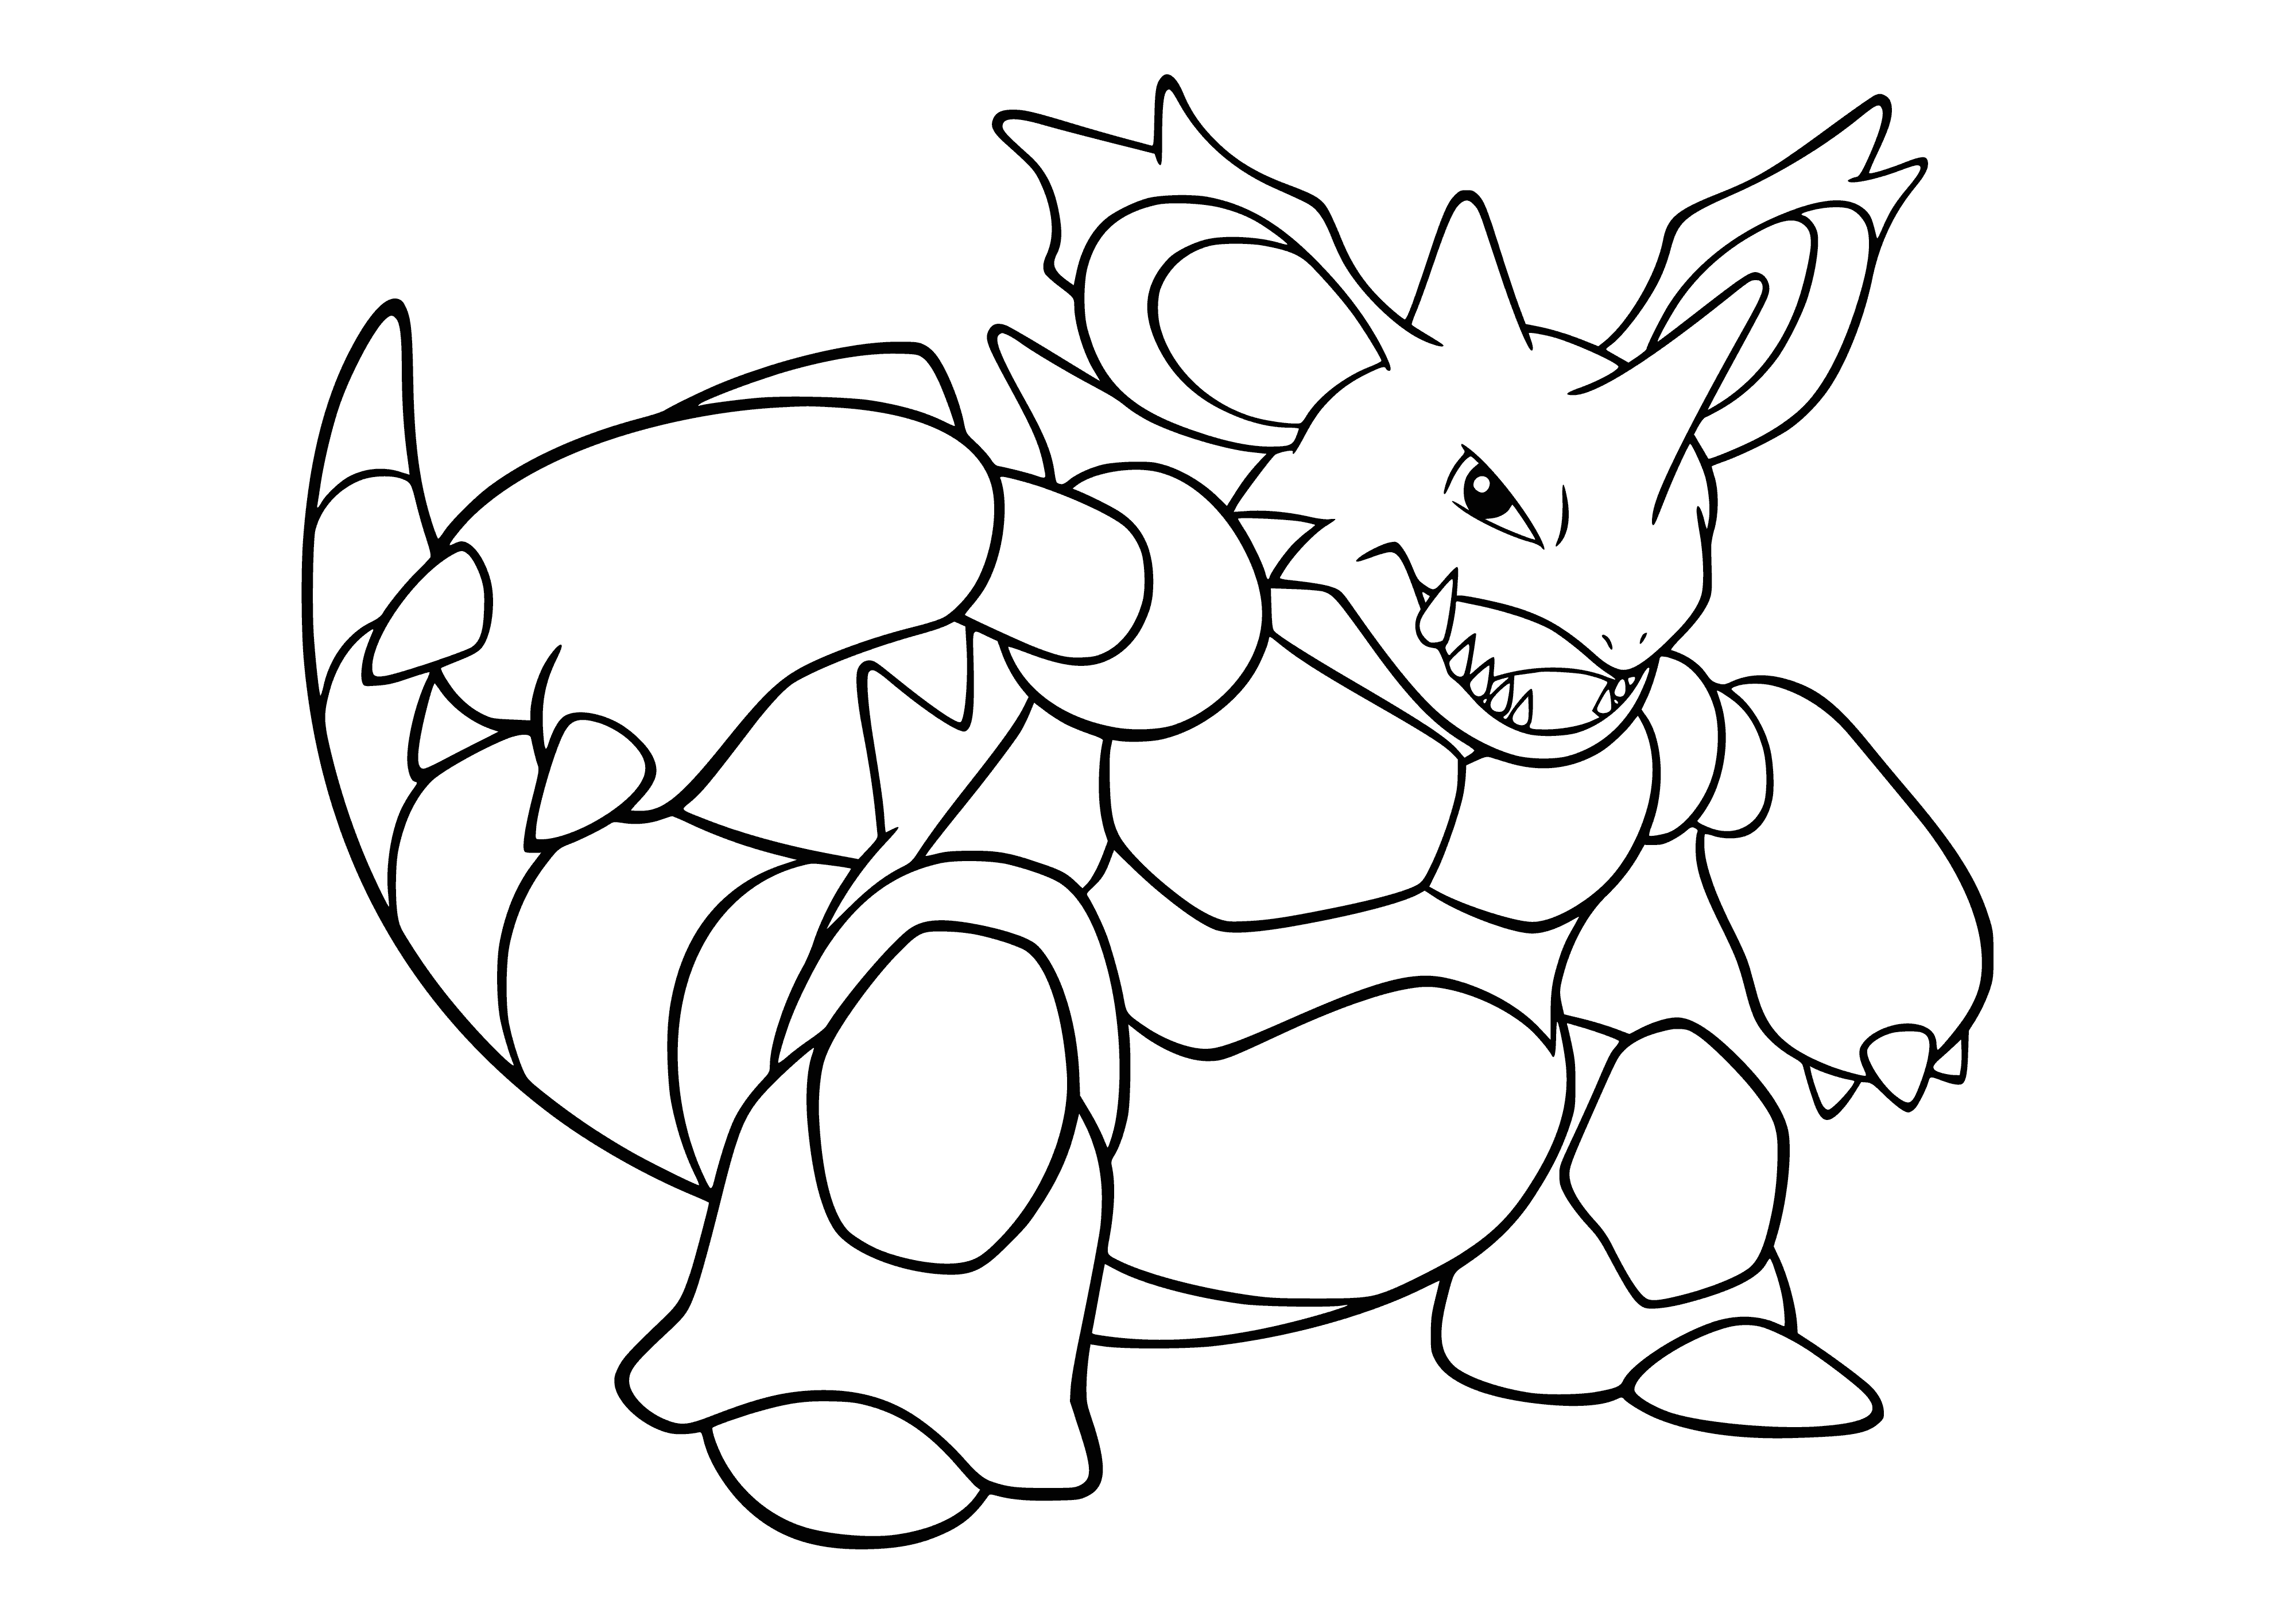 coloring page: Nidoking is a Poison/Ground-type Pokemon. Evolved from Nidorino, it has a blue body w/ spots, red eyes, curved horn, sharp claws, & a long tail.